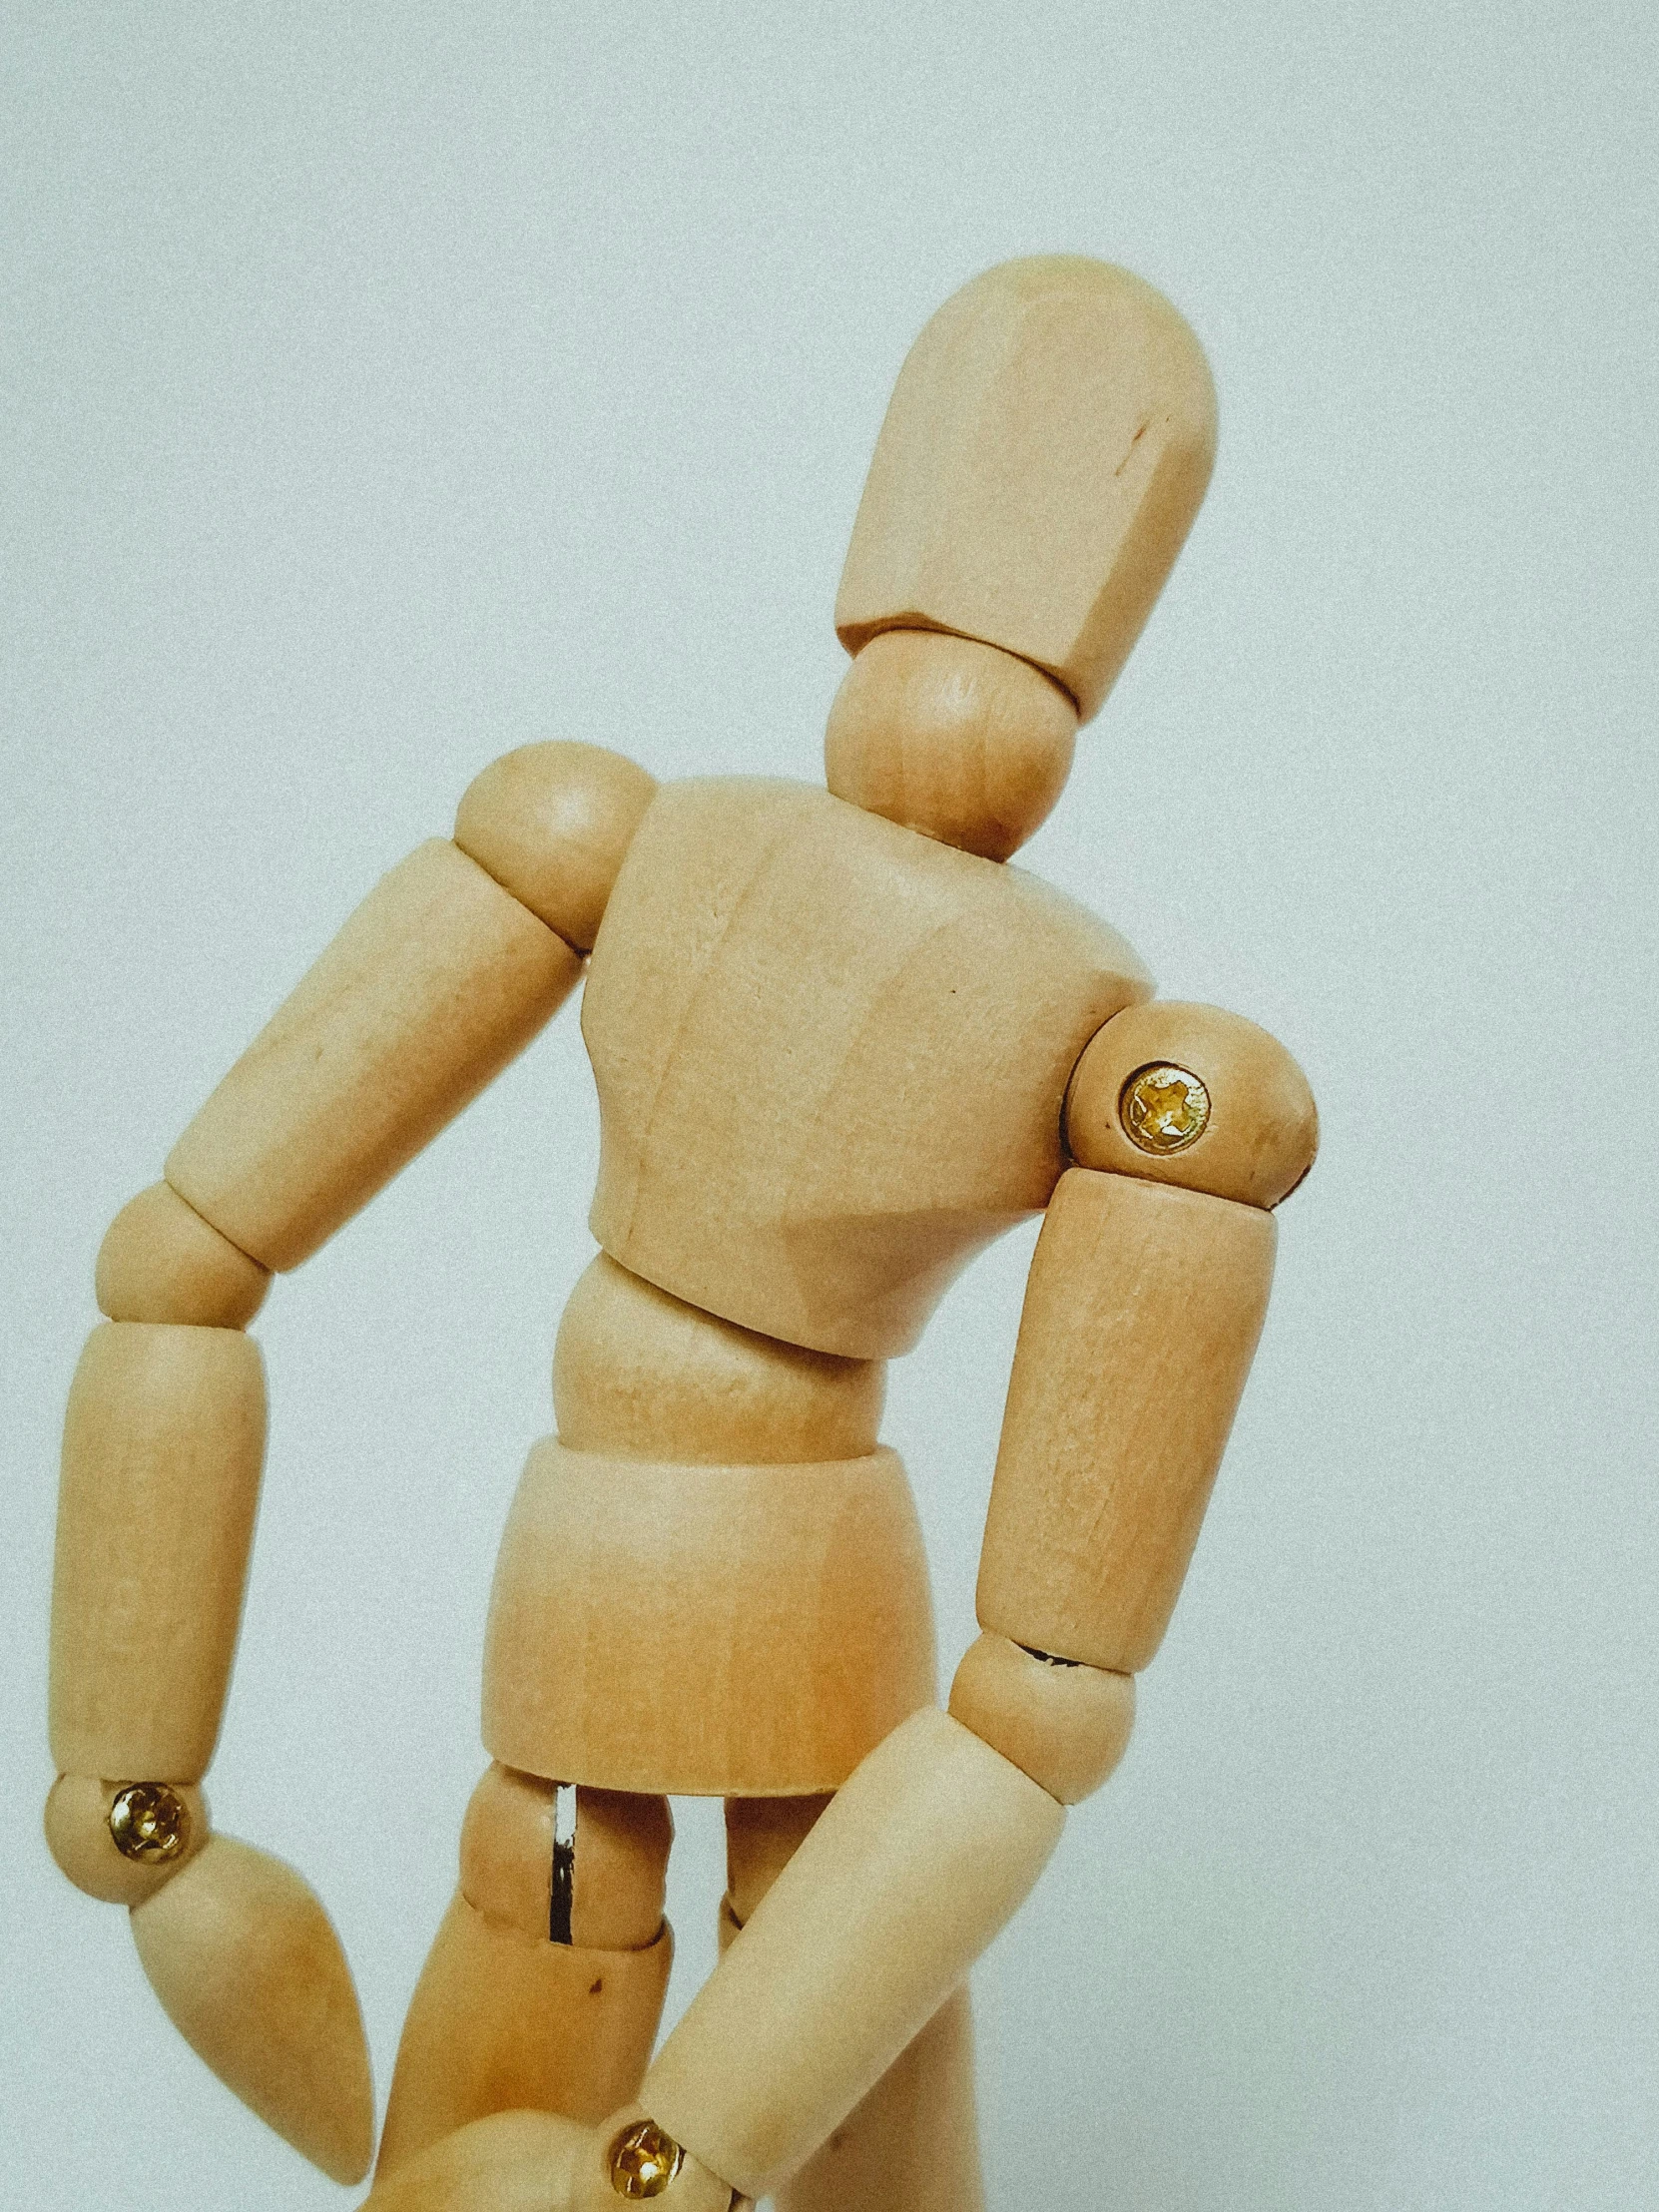 wooden mannequin with golden ons wearing a hat